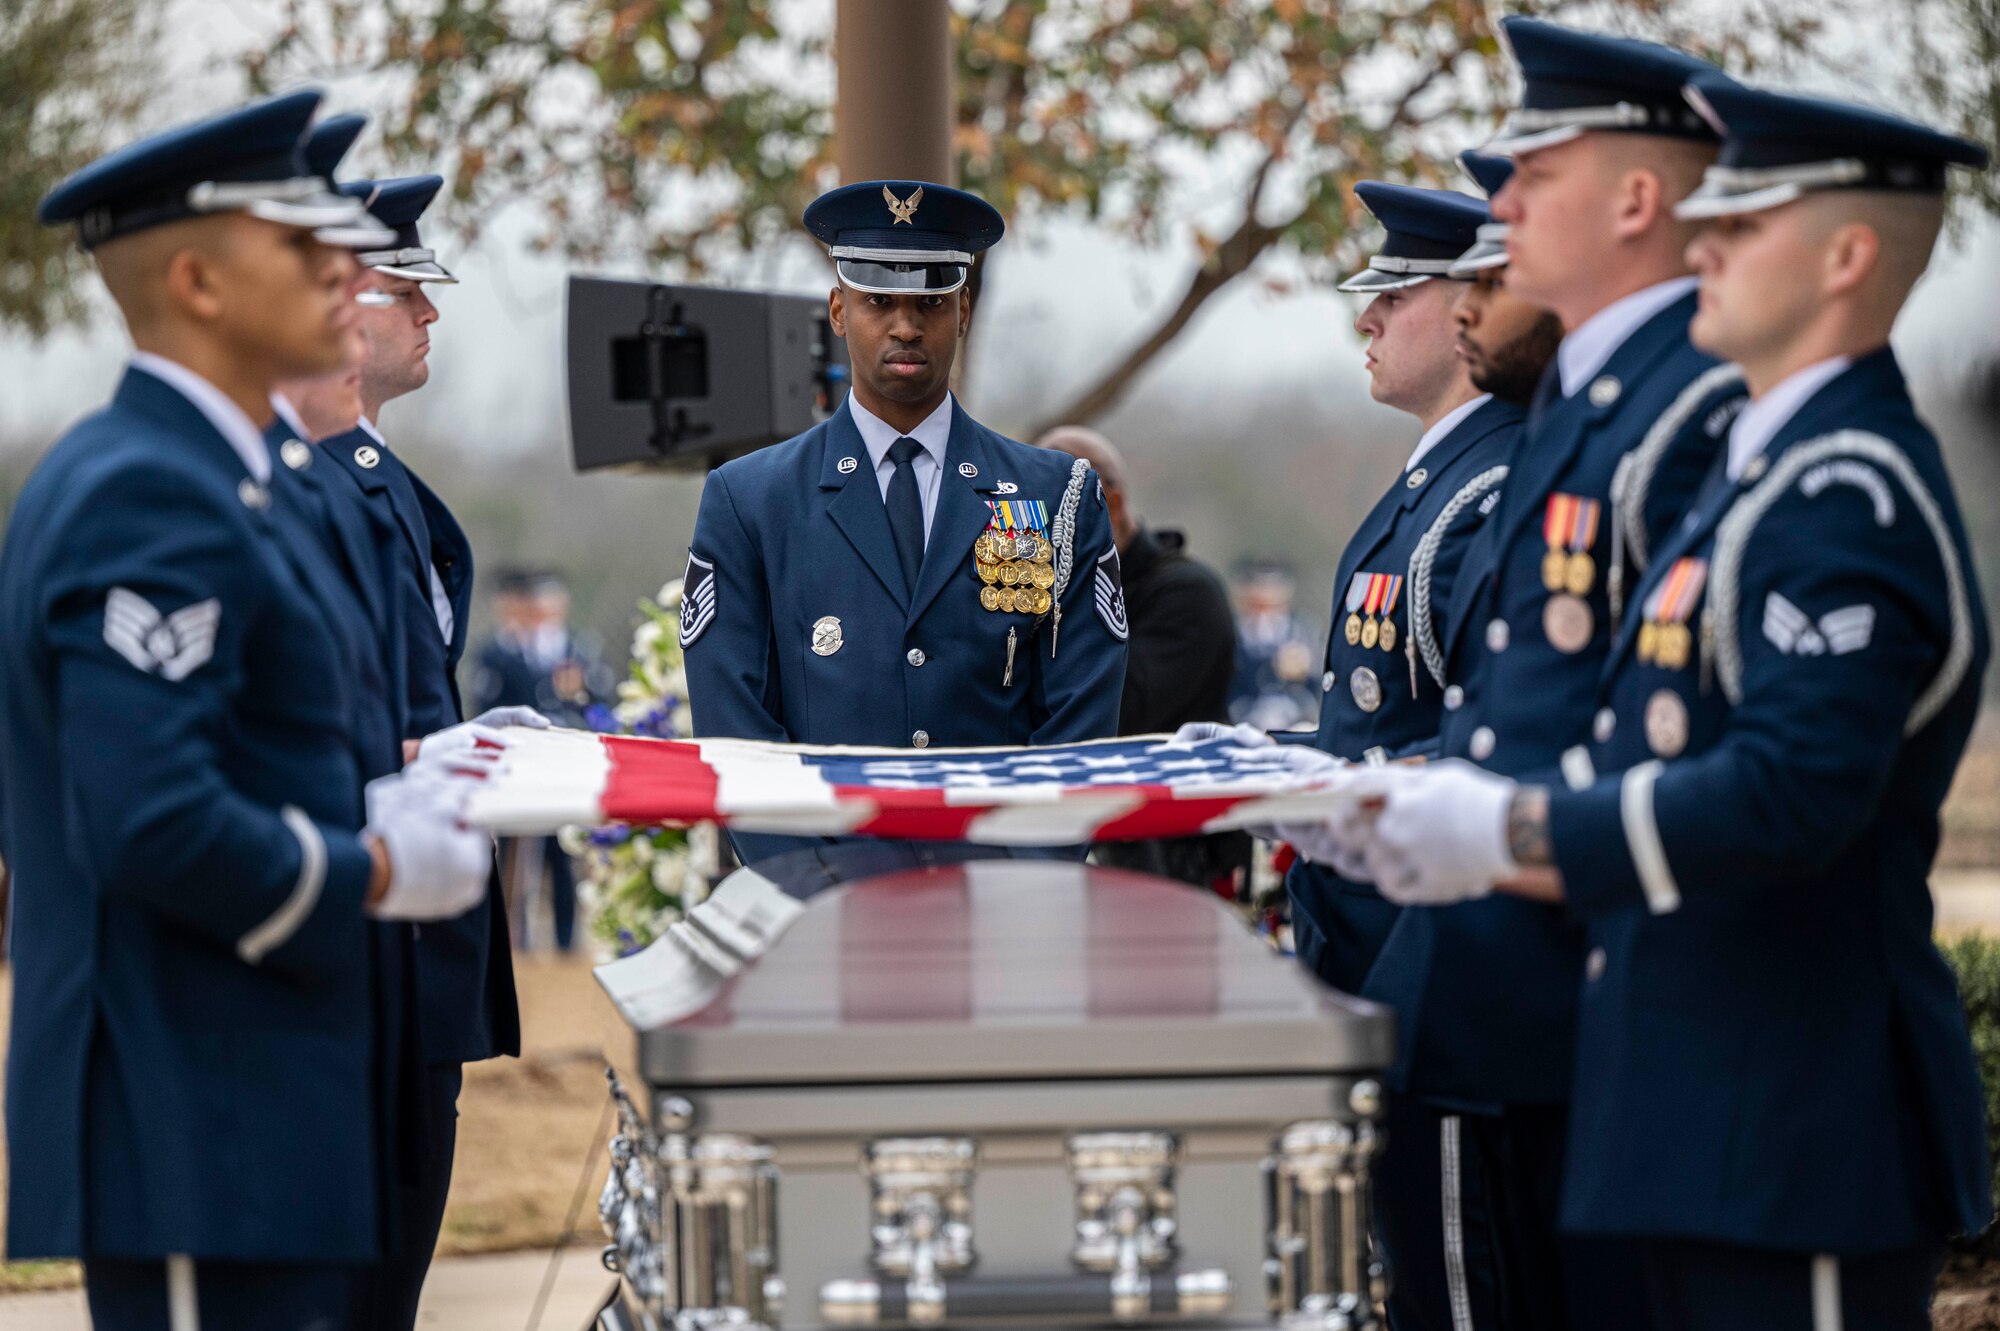 Members of the U.S. Air Force Honor Guard fold the U.S. flag during the interment with full military honors of the fifth Chief Master Sgt. of the Air Force Robert D. Gaylor, Feb. 10, 2024 at Fort Sam Houston National Cemetery, Texas. Gaylor championed Air Force professional military education in the late 1960s and 1970s before he was promoted to Chief Master Sgt. of the Air Force in 1977. He continued to educate and inspire service members for more than 40 years after his retirement from military service. (U.S. Air Force photo by Tristin English).